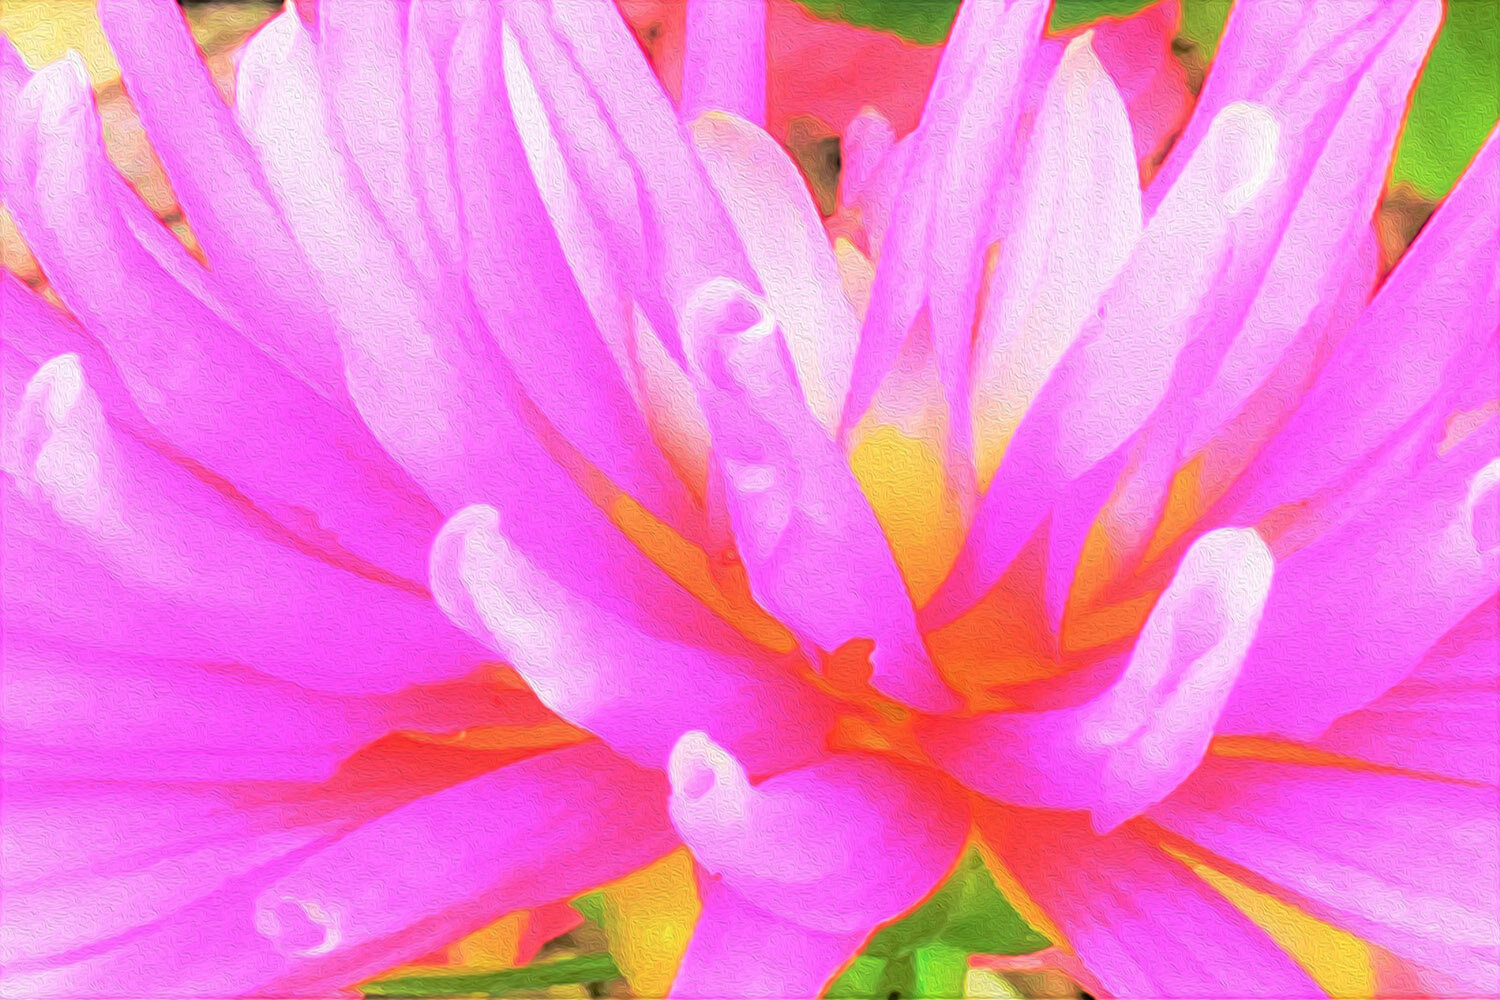 Fiery Hot Pink and Yellow Cactus Dahlia Flower